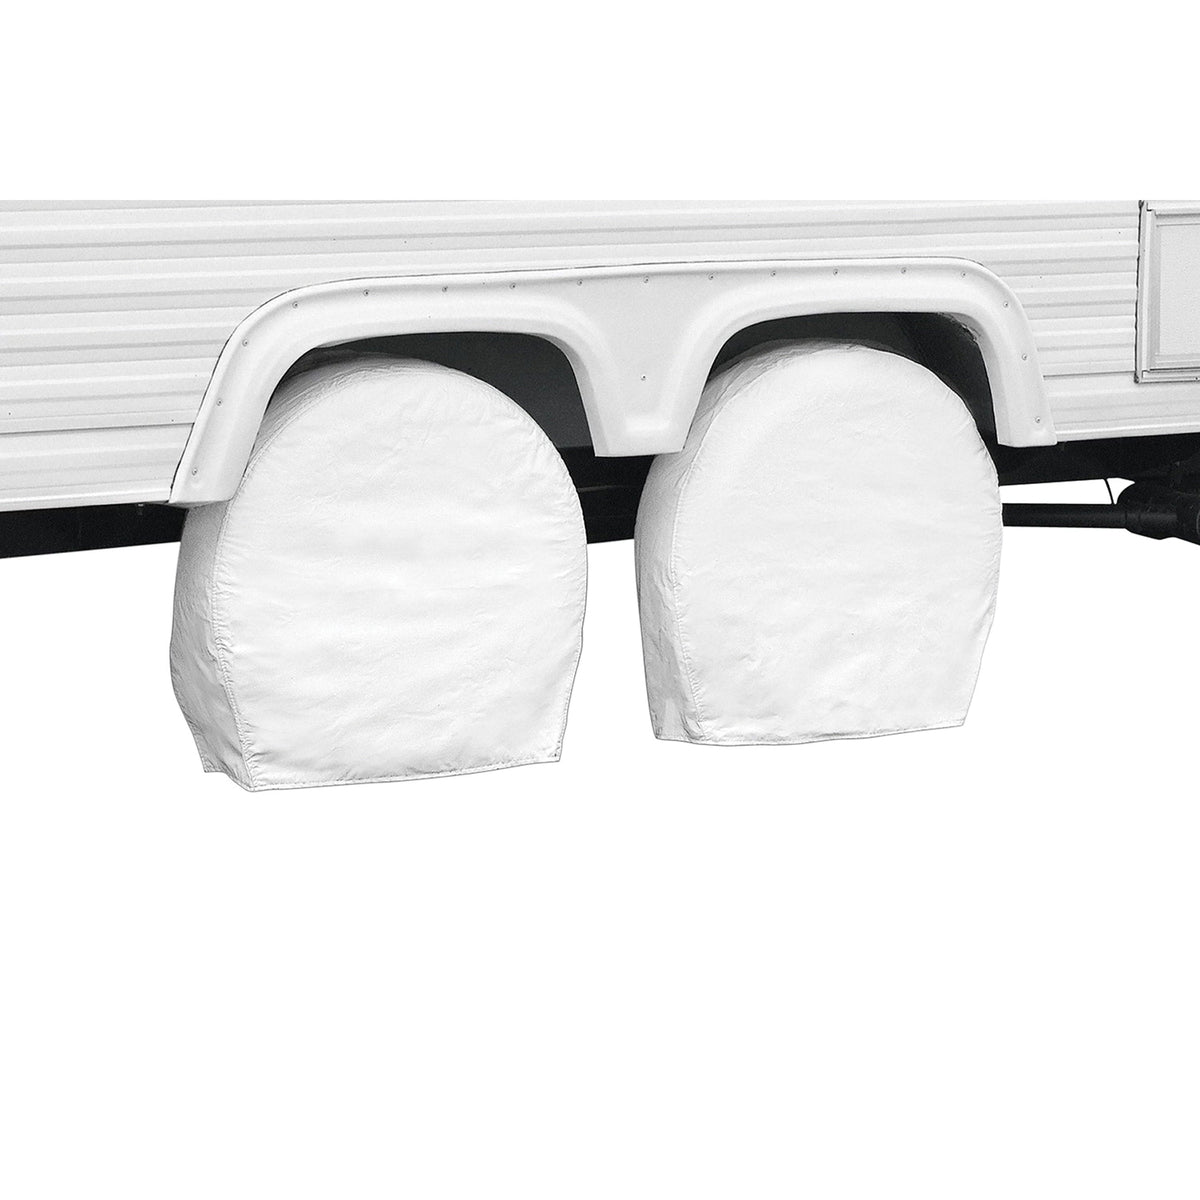 Classic Accessories Qualifies for Free Shipping Classic Accessories Over Drive RV Wheel Cover 18-21" x 6.75" White #76220